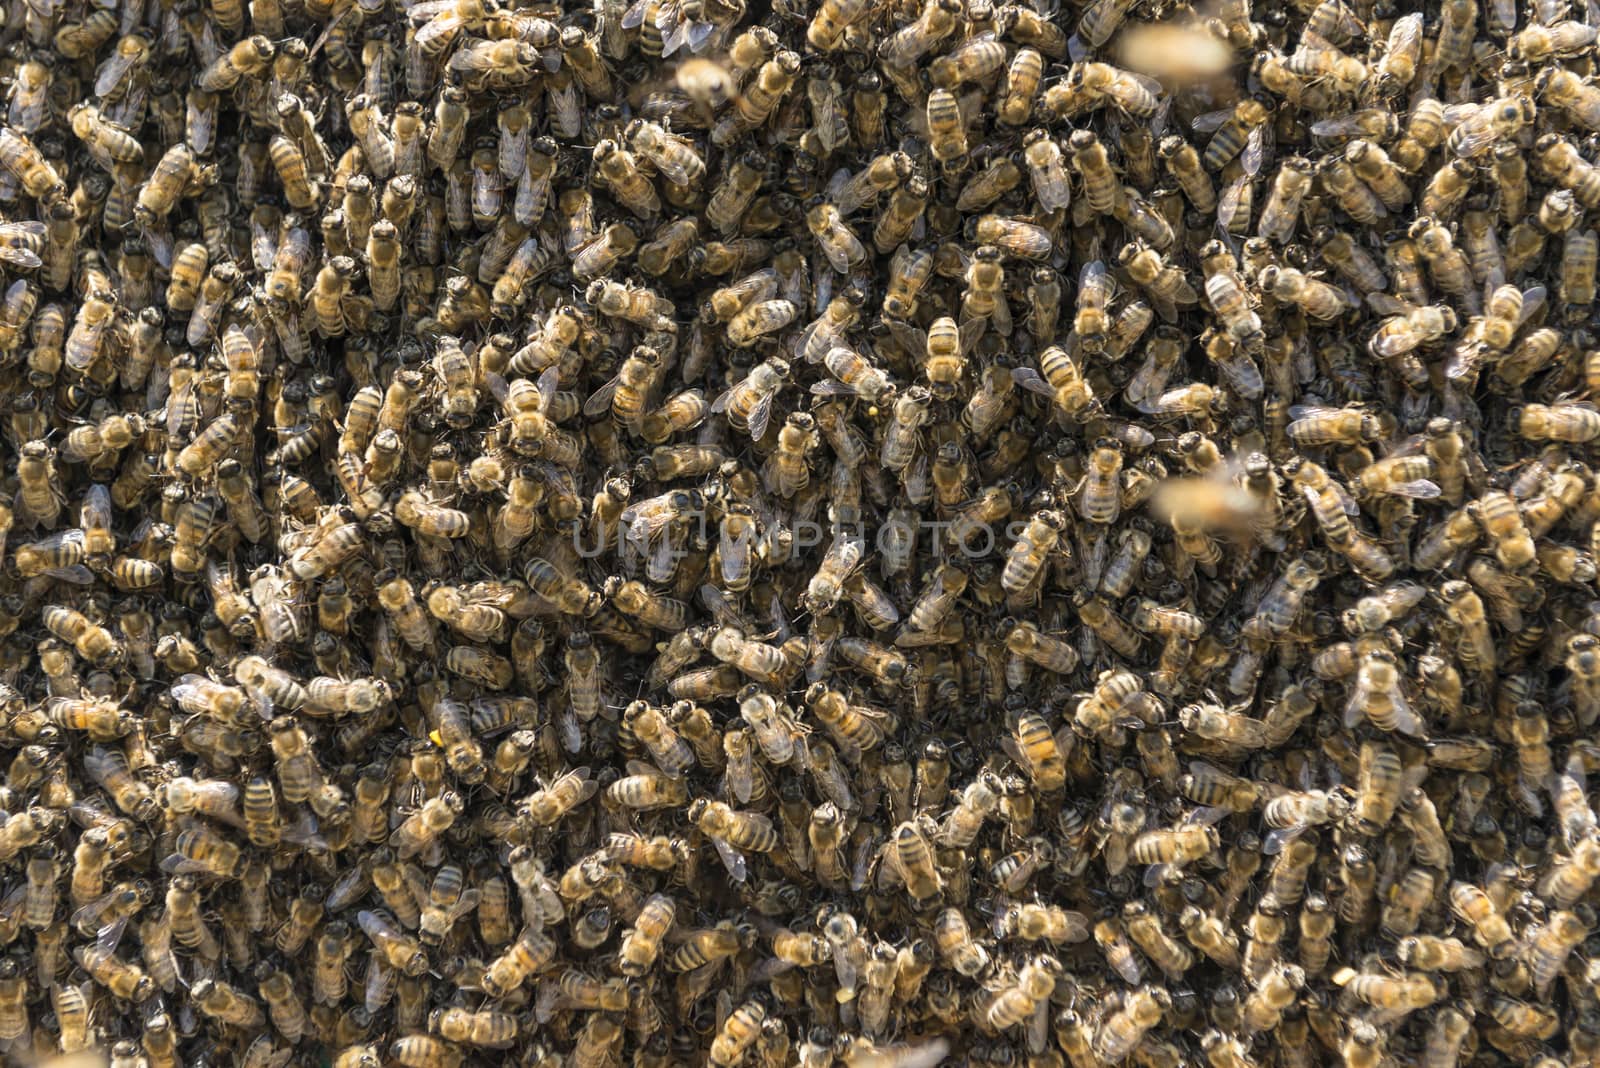 crowded bee colony populations